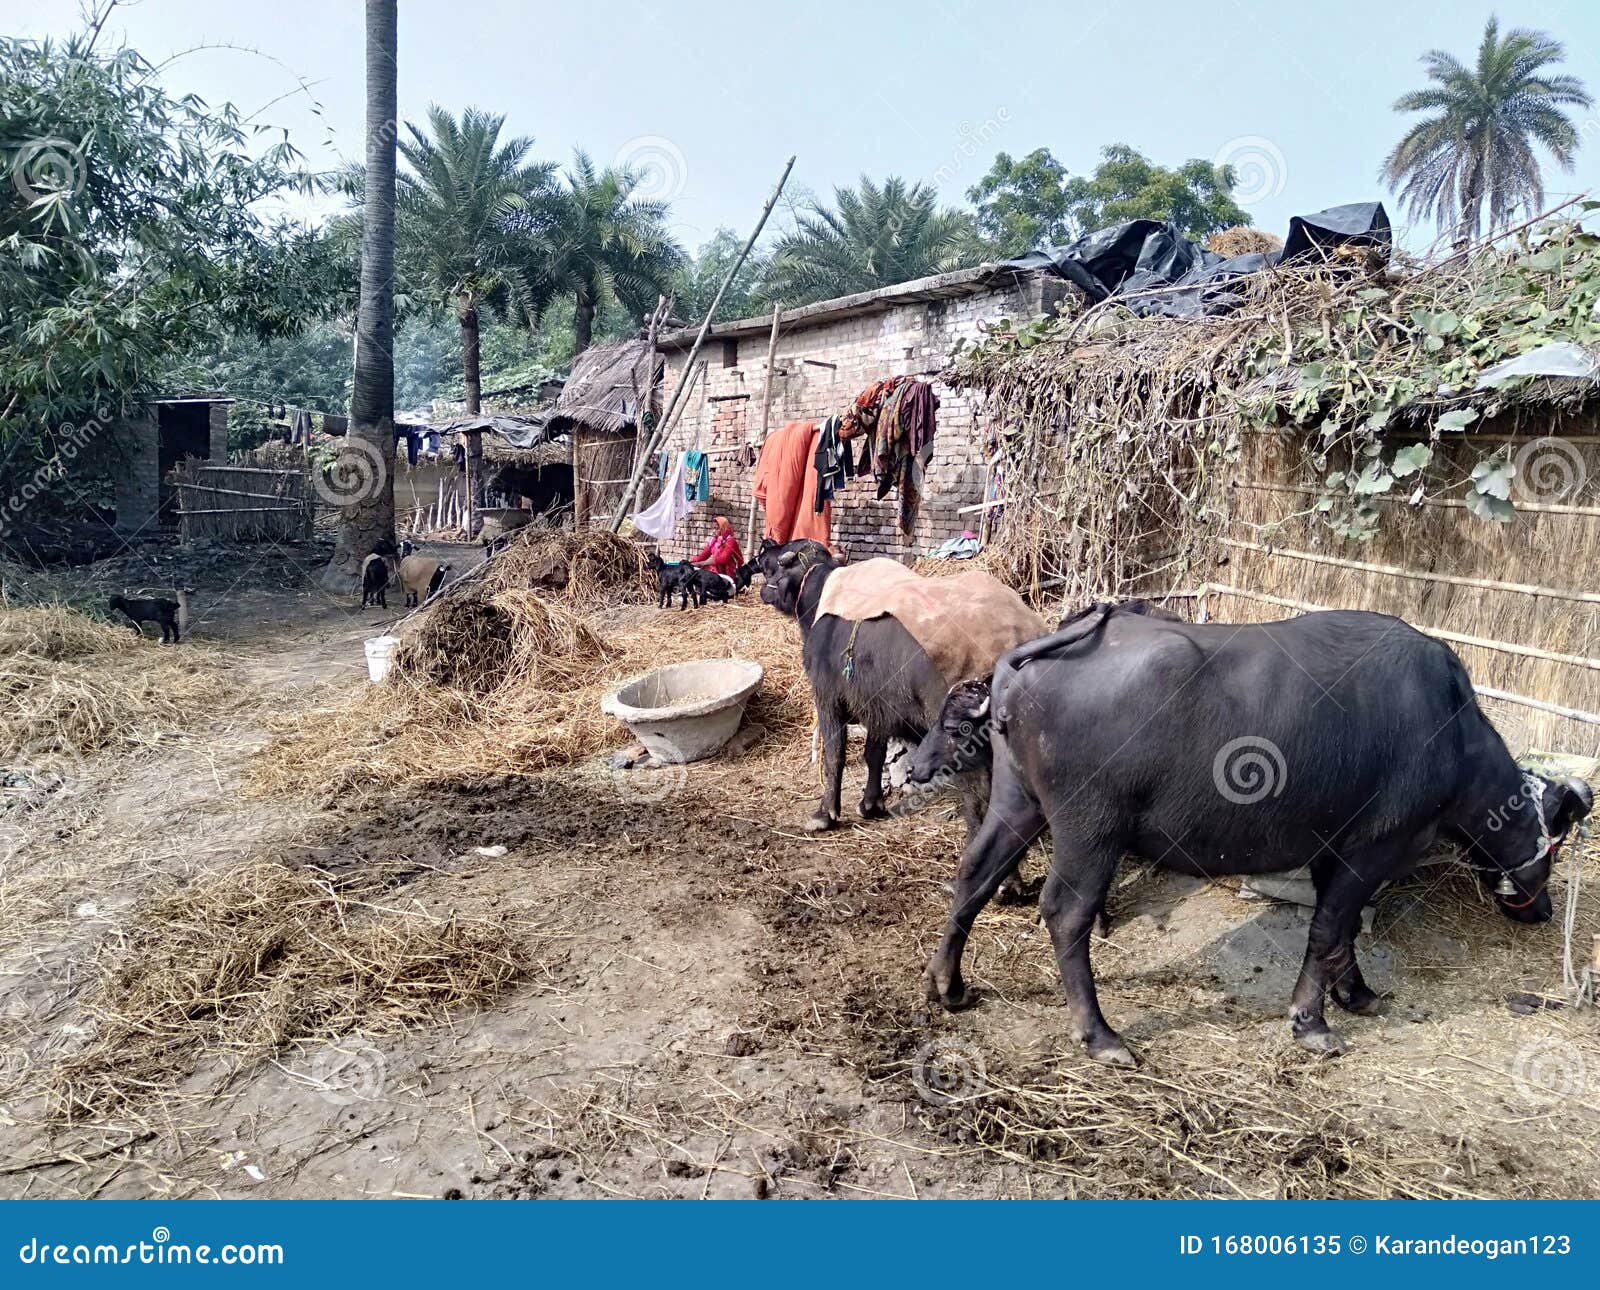 Rural Area of Indian Village with Animals, Trees, Houses and Some Peoples  Editorial Image - Image of village, grazing: 168006135